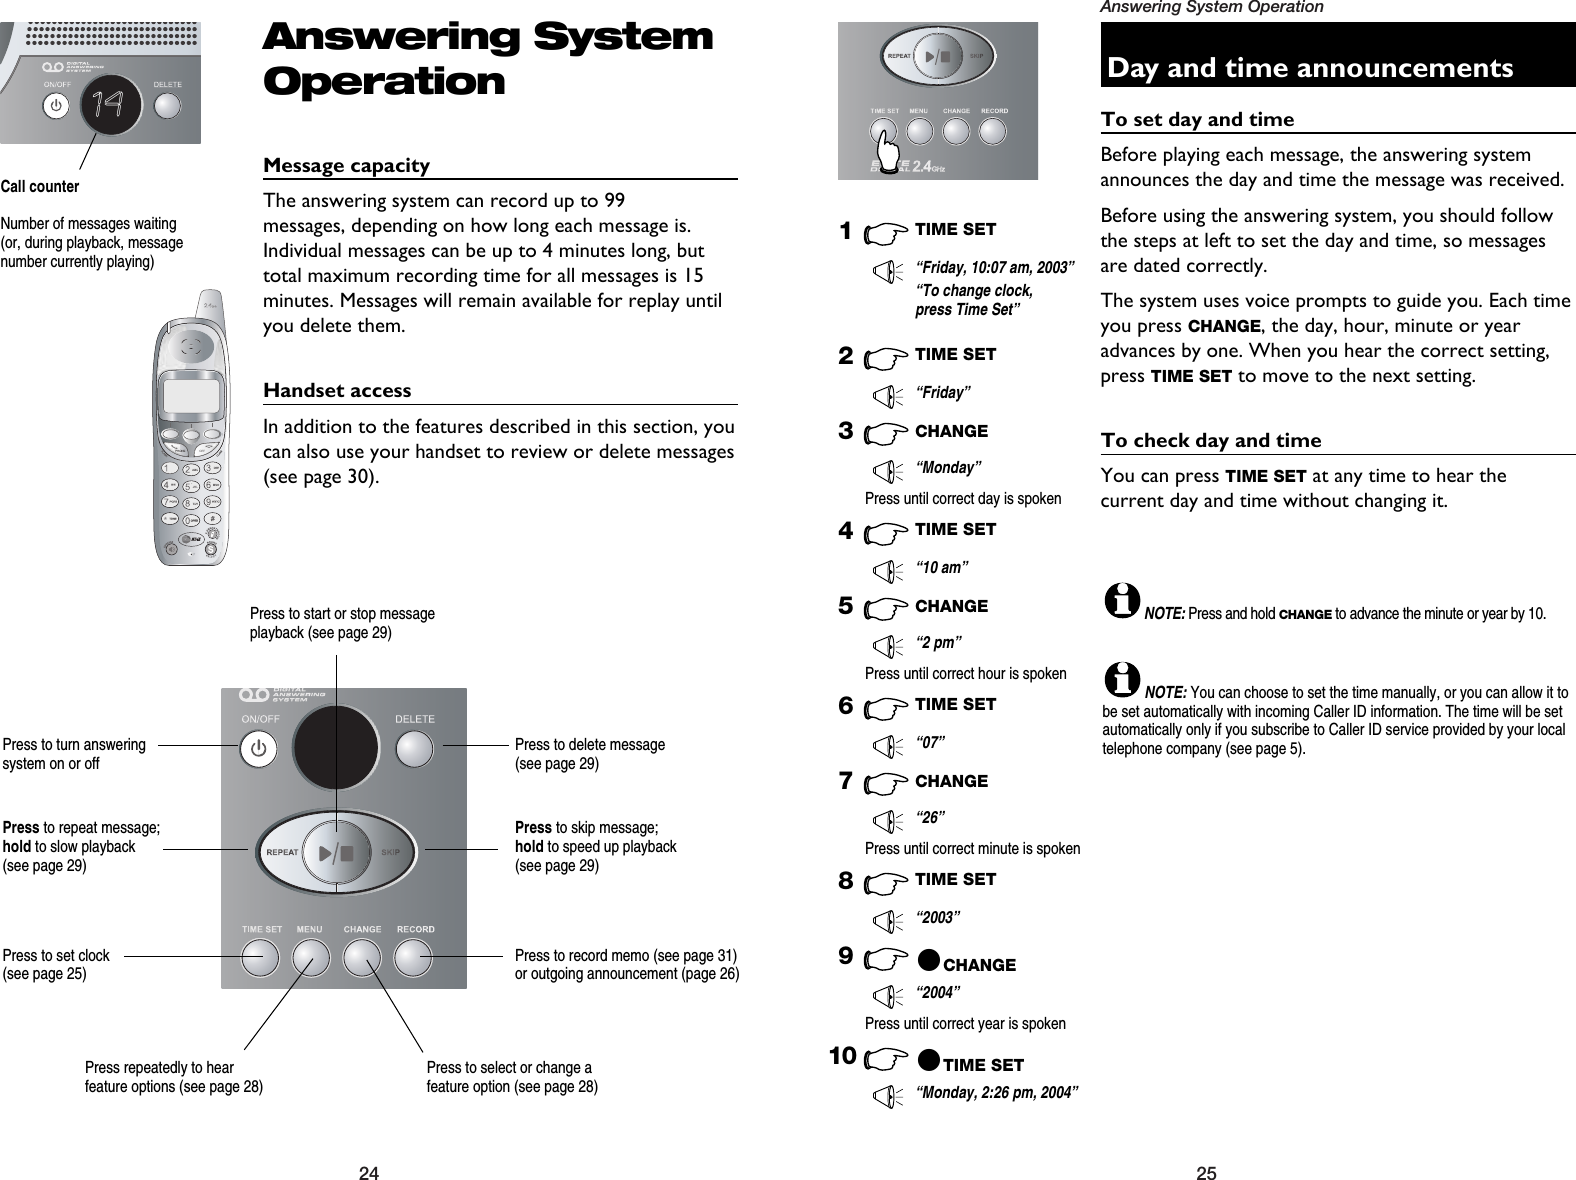 25Answering System Operation24Day and time announcementsTo set day and timeBefore playing each message, the answering systemannounces the day and time the message was received. Before using the answering system, you should followthe steps at left to set the day and time, so messagesare dated correctly.The system uses voice prompts to guide you. Each timeyou press CHANGE, the day, hour, minute or yearadvances by one. When you hear the correct setting,press TIME SET to move to the next setting.To check day and timeYou can press TIME SET at any time to hear the current day and time without changing it.1TIME SET“Friday, 10:07 am, 2003”8TIME SET“2003”10 @TIME SET“Monday, 2:26 pm, 2004”“To change clock,press Time Set”2TIME SET“Friday”3CHANGE“Monday”Press until correct day is spoken4TIME SET“10 am”5CHANGE“2 pm”Press until correct hour is spoken6TIME SET“07”7CHANGE“26”9@CHANGE“2004”Press until correct minute is spokenPress until correct year is spokenNOTE:Press and hold CHANGEto advance the minute or year by 10.NOTE:You can choose to set the time manually, or you can allow it tobe set automatically with incoming Caller ID information. The time will be setautomatically only if you subscribe to Caller ID service provided by your localtelephone company (see page 5).Answering SystemOperationMessage capacityThe answering system can record up to 99 messages, depending on how long each message is.Individual messages can be up to 4 minutes long, buttotal maximum recording time for all messages is 15minutes. Messages will remain available for replay untilyou delete them.Handset accessIn addition to the features described in this section, youcan also use your handset to review or delete messages(see page 30).14Call counterNumber of messages waiting(or, during playback, messagenumber currently playing)Press repeatedly to hear feature options (see page 28)Press to select or change afeature option (see page 28)Press to set clock (see page 25)Press to record memo (see page 31) or outgoing announcement (page 26)Press to delete message (see page 29)Press to repeat message; hold to slow playback (see page 29)Press to skip message; hold to speed up playback (see page 29)Press to start or stop messageplayback (see page 29)Press to turn answering system on or off